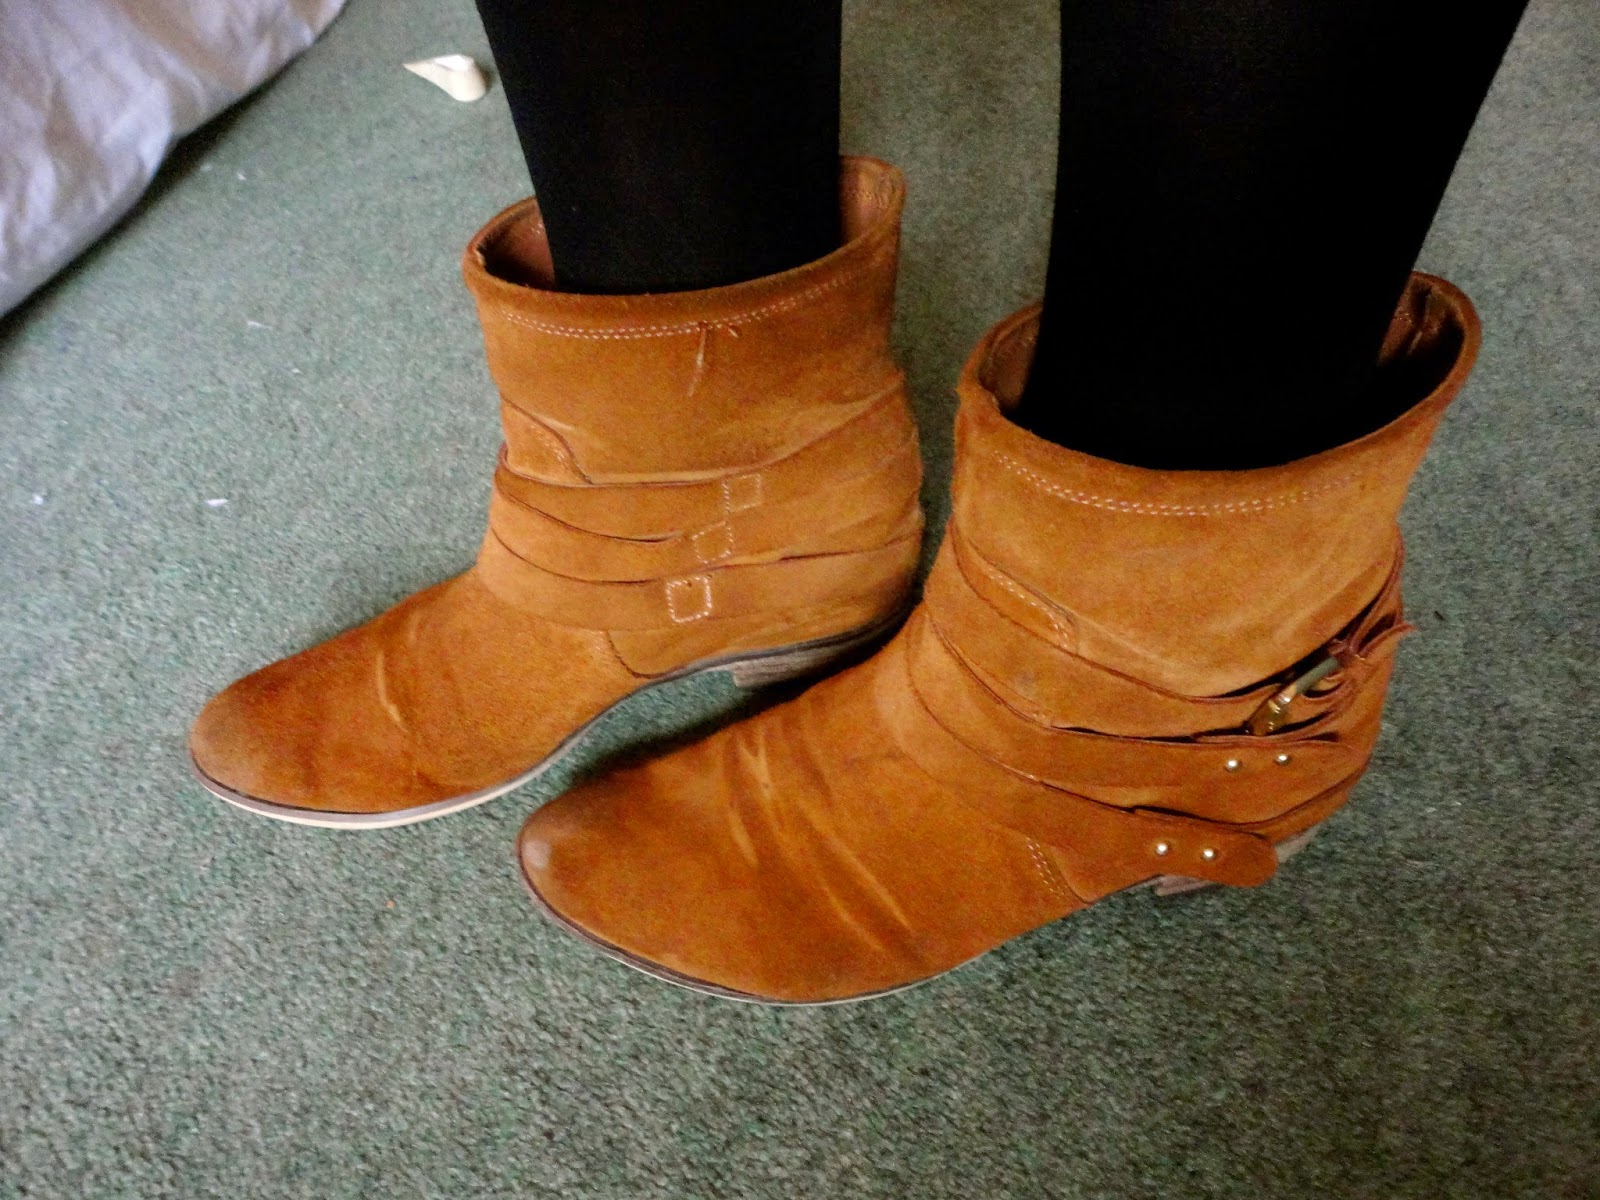 Brown suede ankle boots